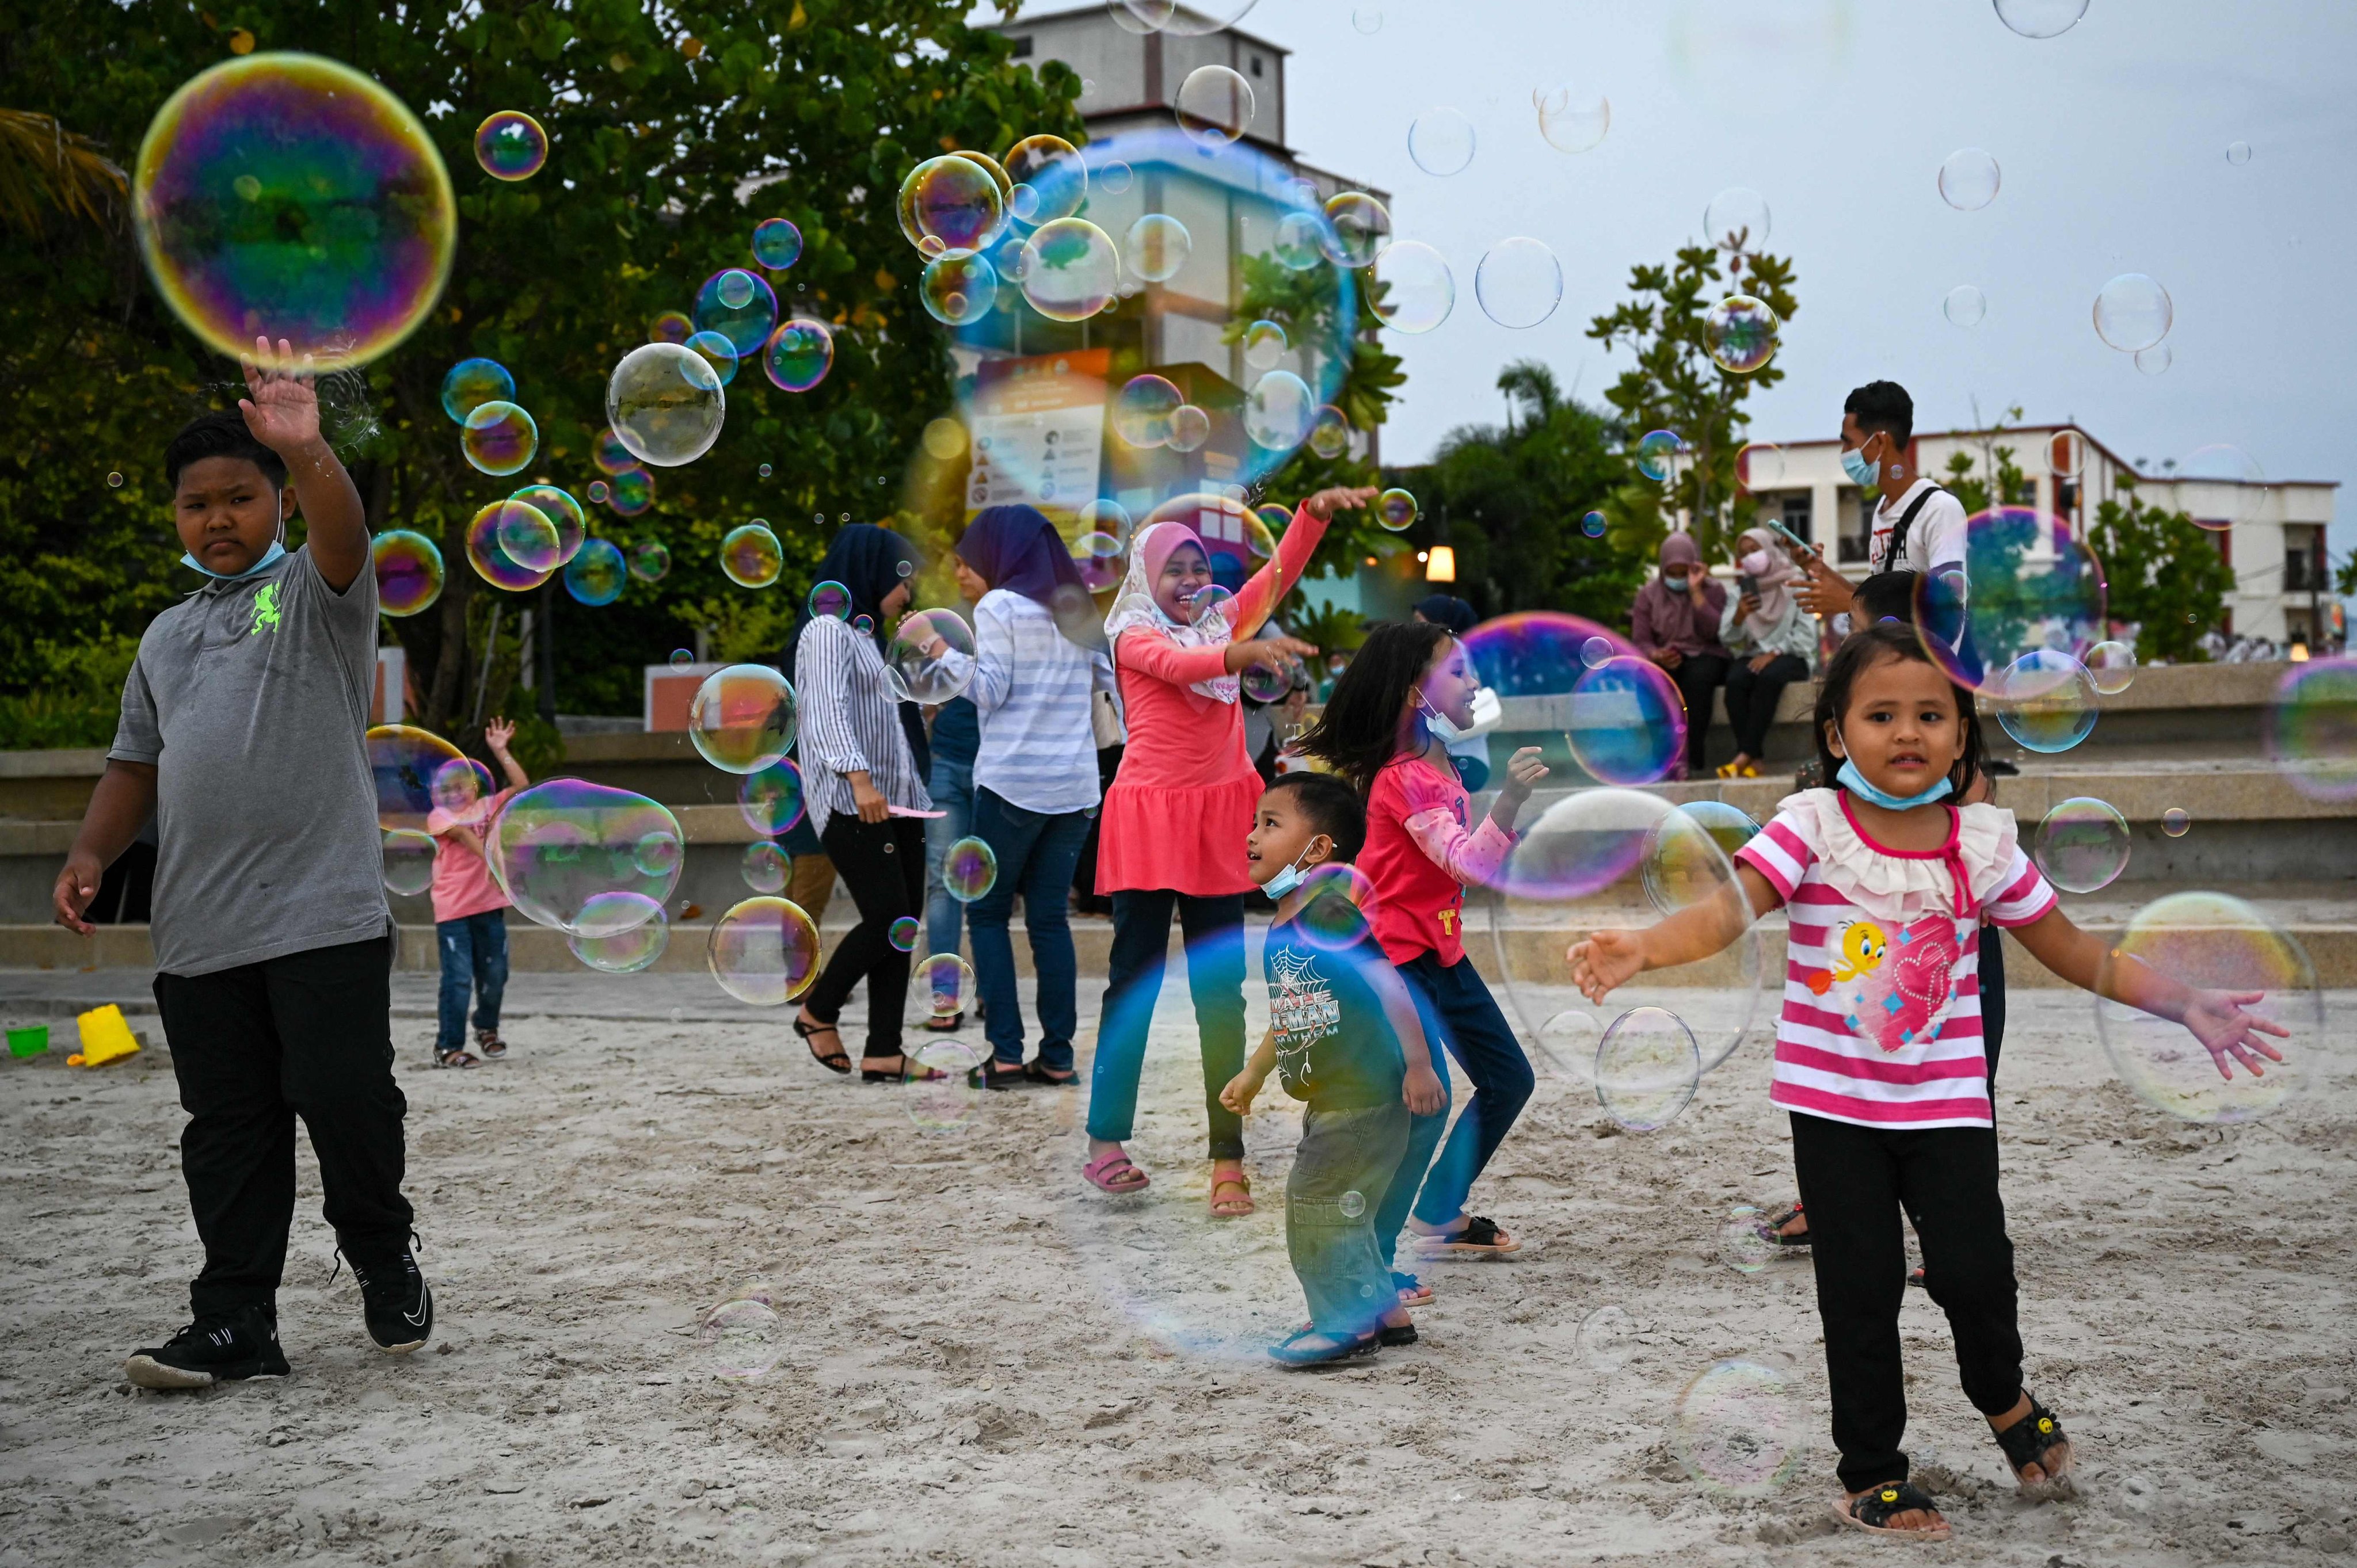 Children play with bubbles at Pantai Cenang in Langkawi on September 15, 2021. The Malaysian cabinet recently rejected a proposal to amend the constitution that would result in certain categories of children having to apply for citizenship. Photo: AFP